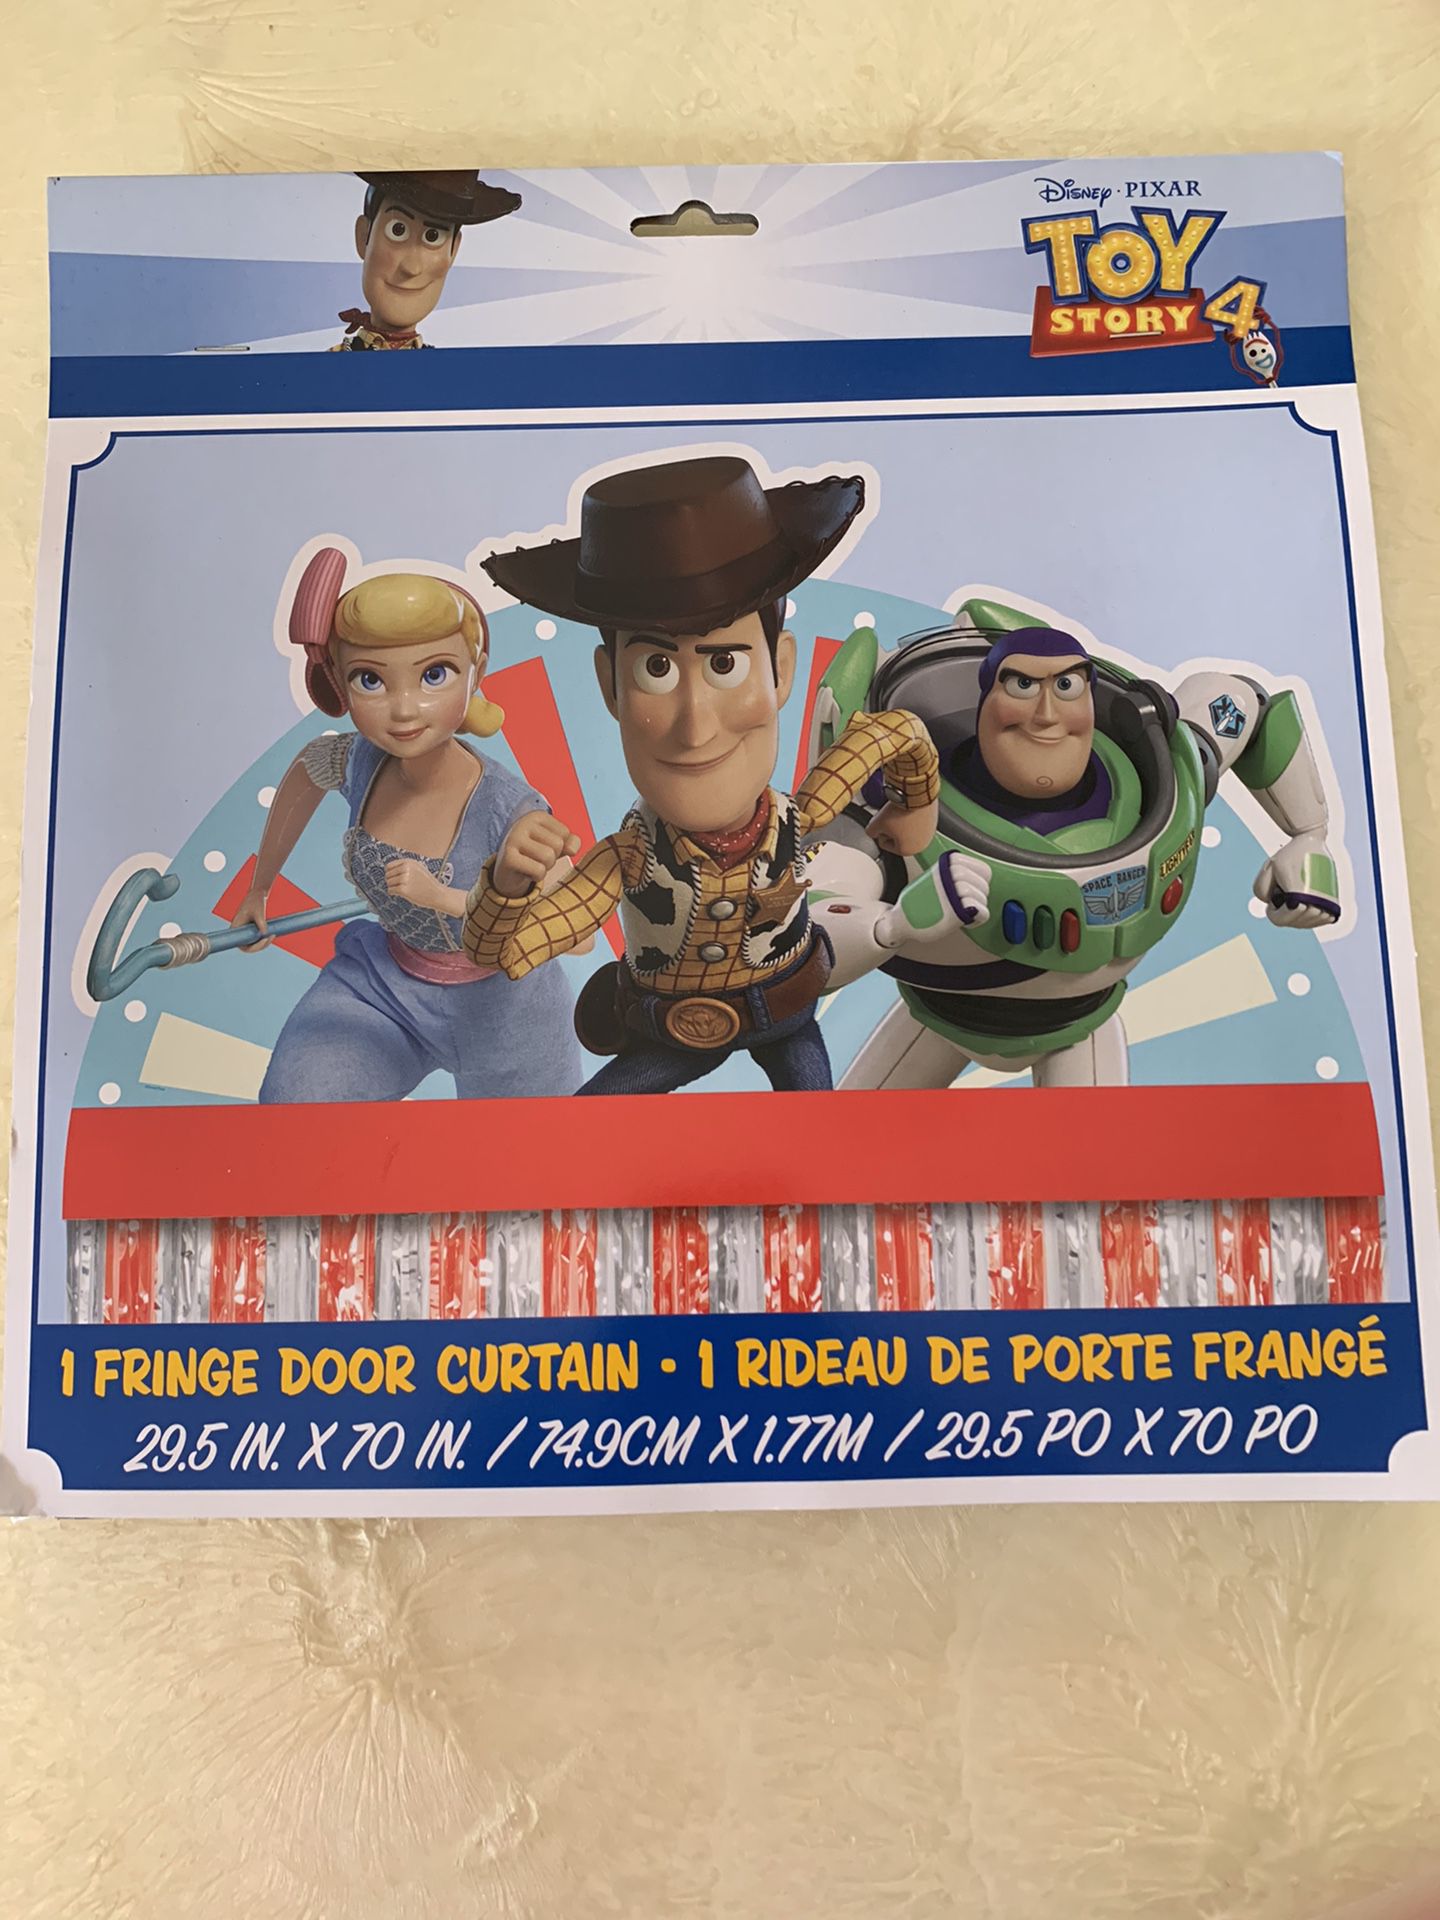 Toy story party supplies